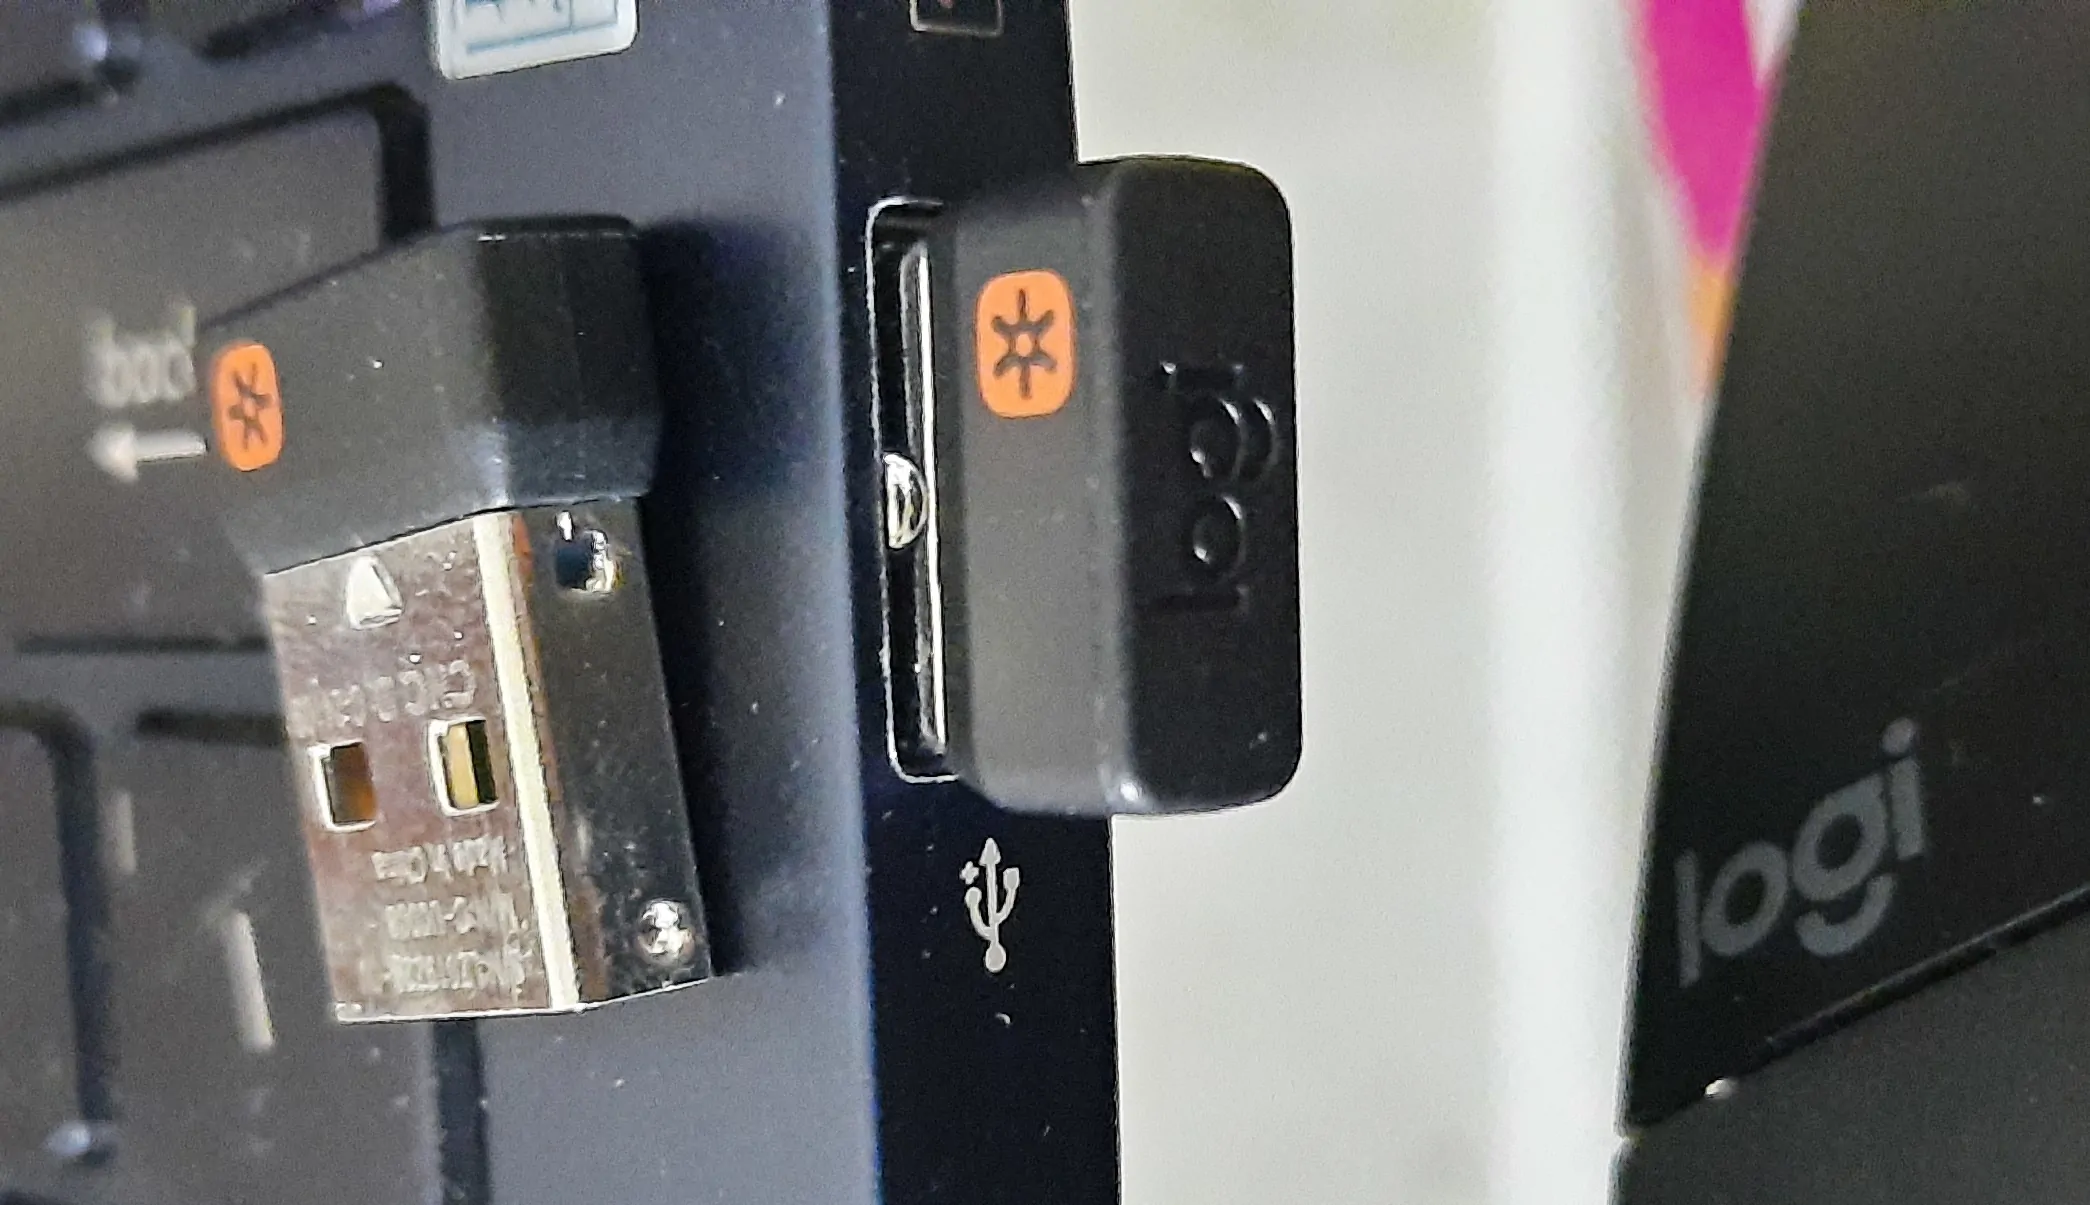 USB receiver/dongle